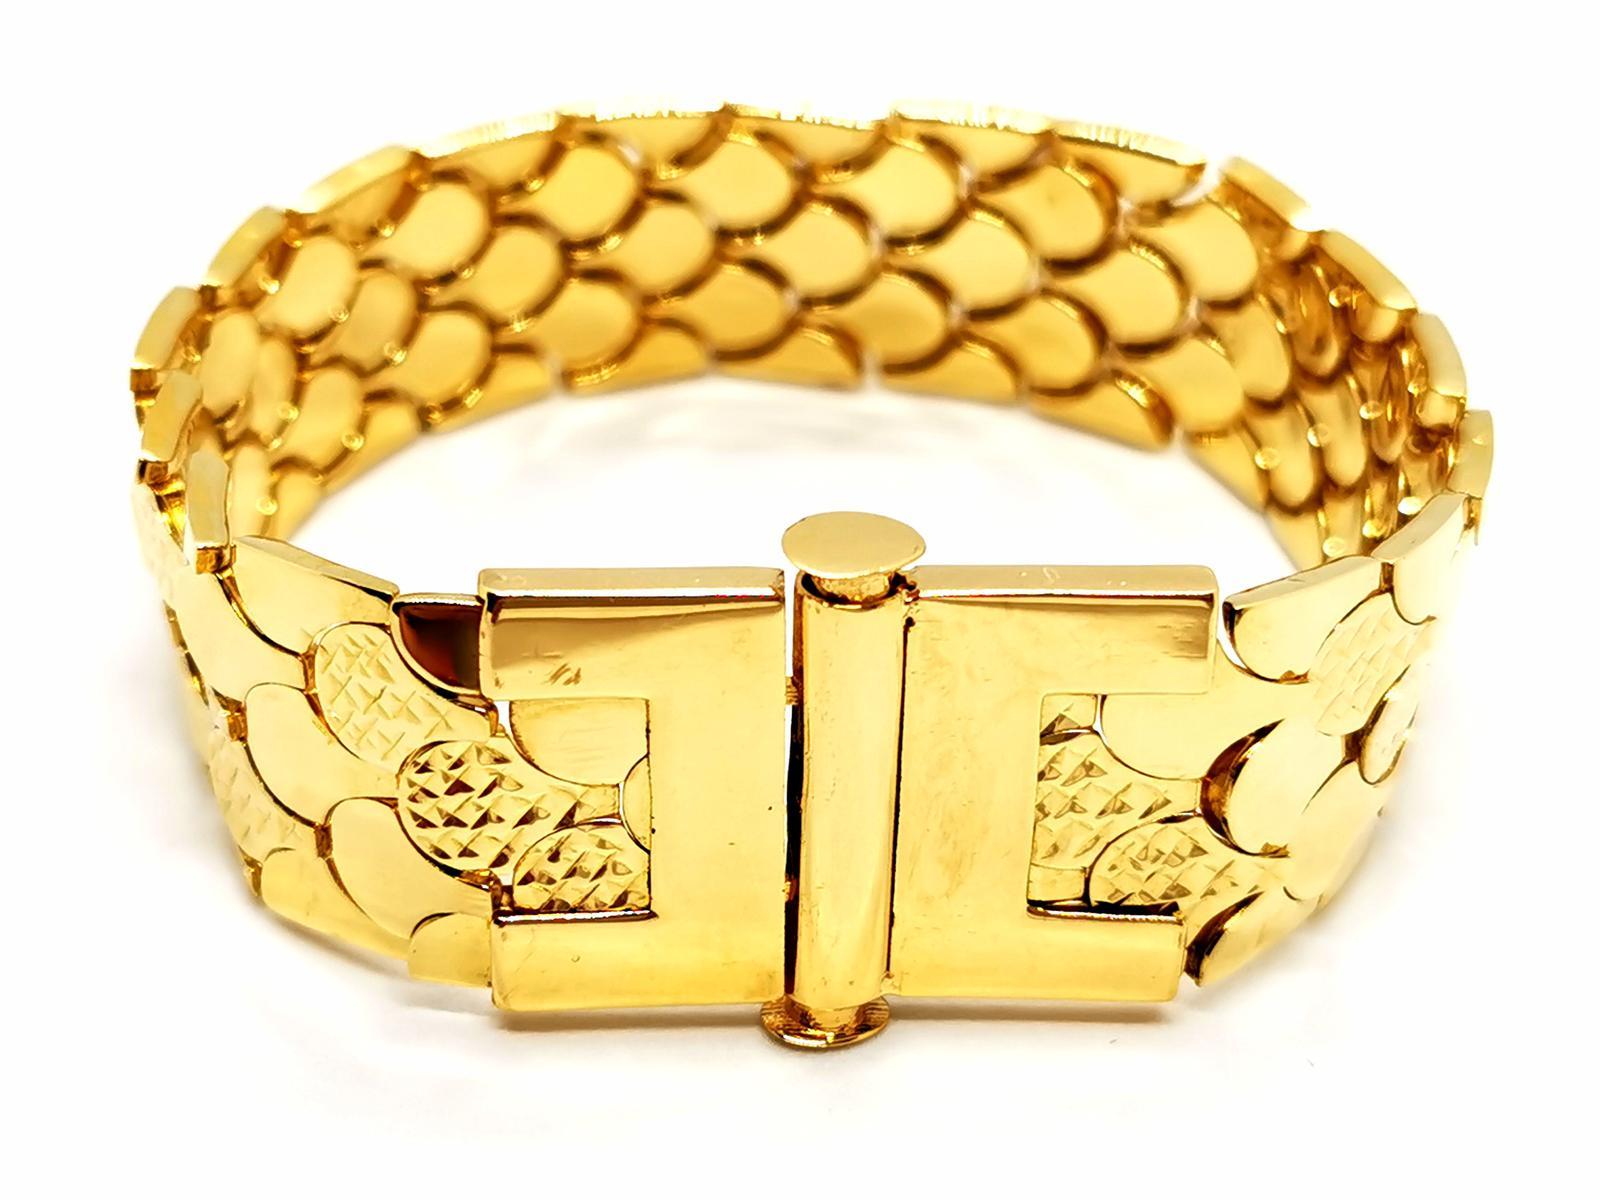 Cuff bracelet. in yellow gold 750 thousandths (18 carats). scale pattern. semi-articulated. length: 19 cm. width: 1.78 cm. total weight: 33.79g. Owl hallmark. excellent condition.
